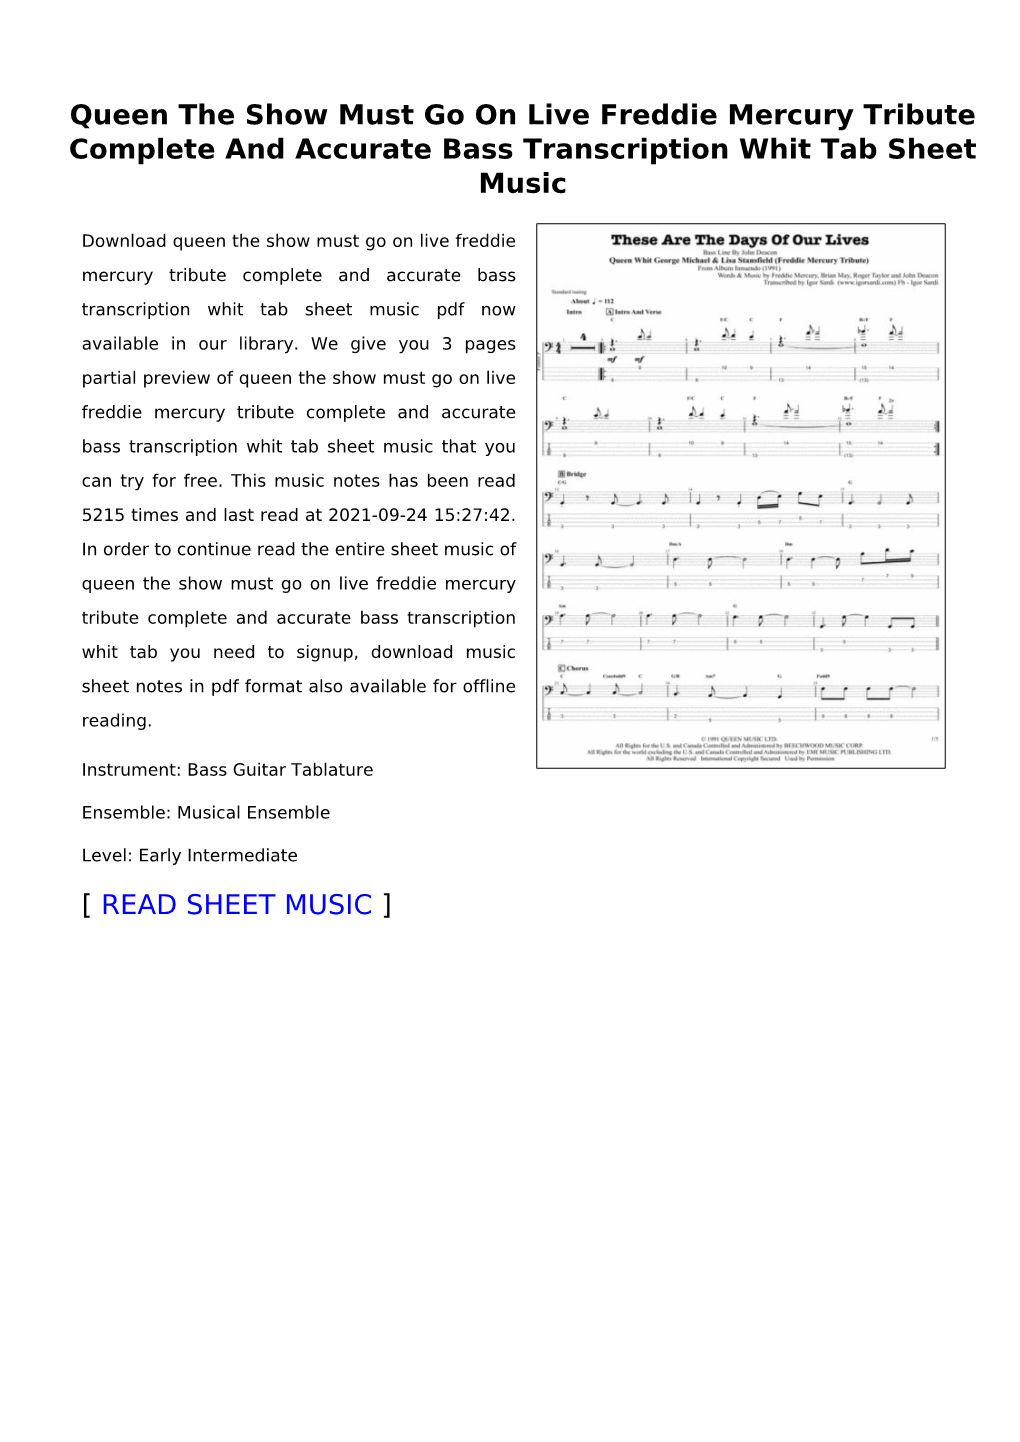 Queen the Show Must Go on Live Freddie Mercury Tribute Complete and Accurate Bass Transcription Whit Tab Sheet Music